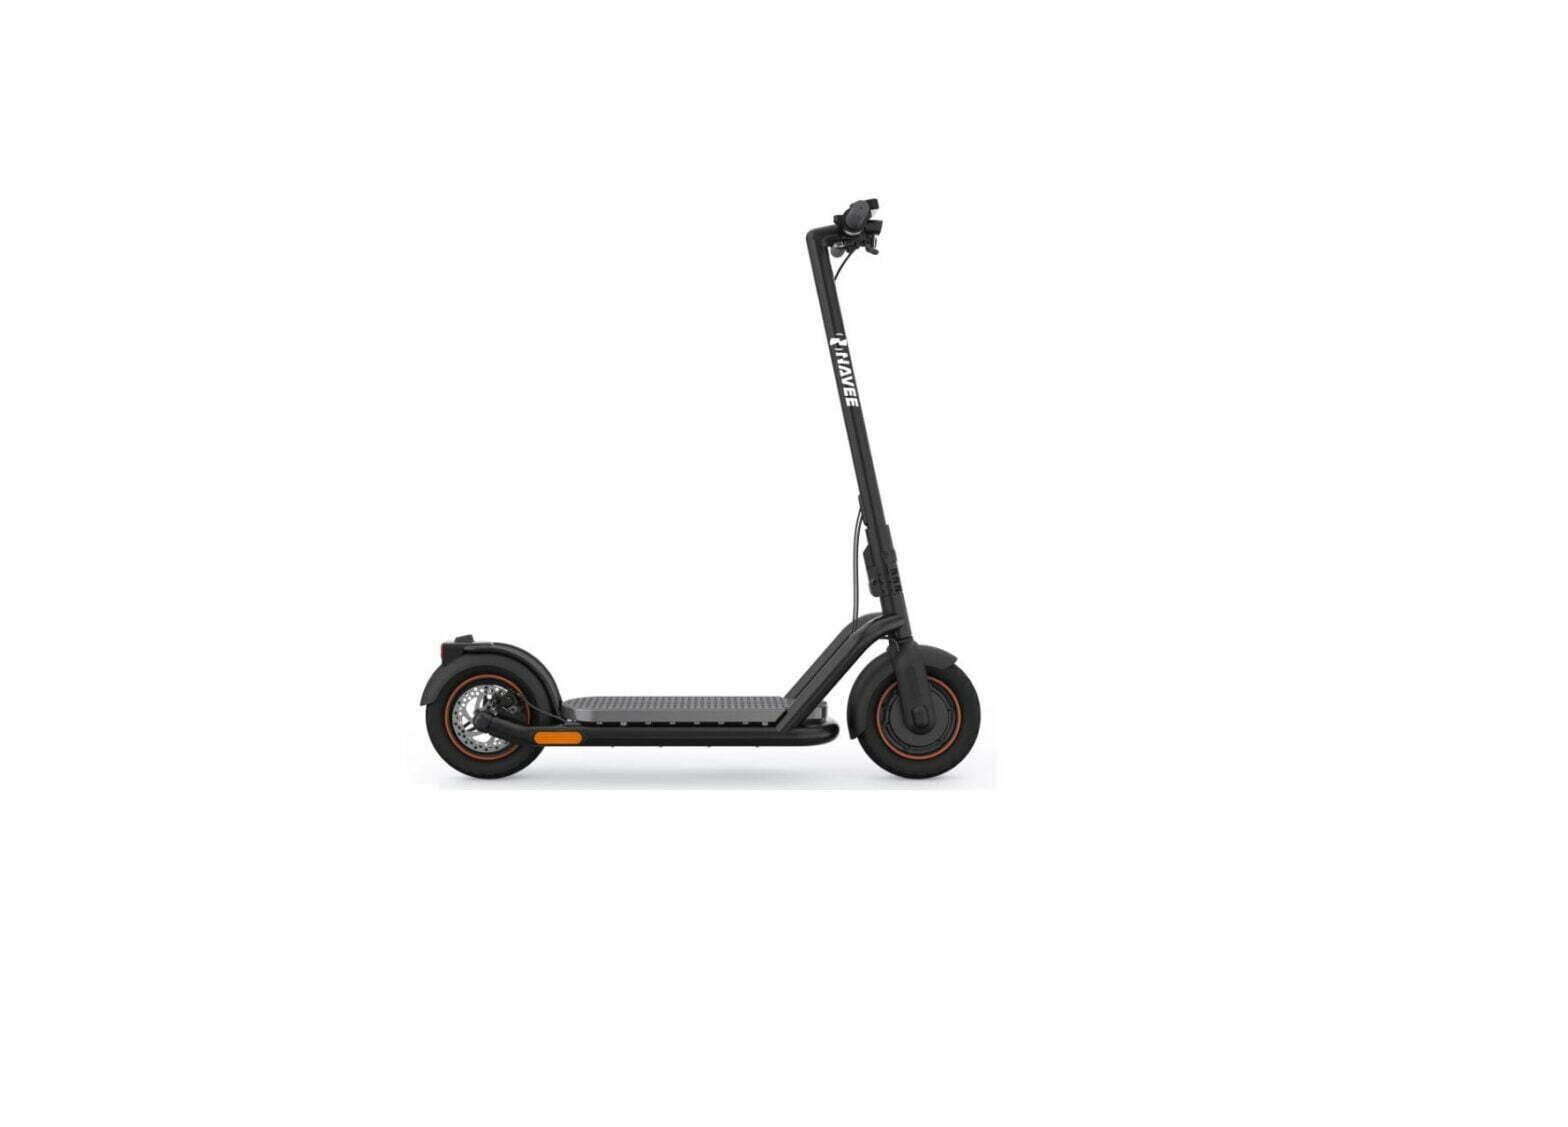 NAVEE S65 Electric Scooter User Manual - Featured image